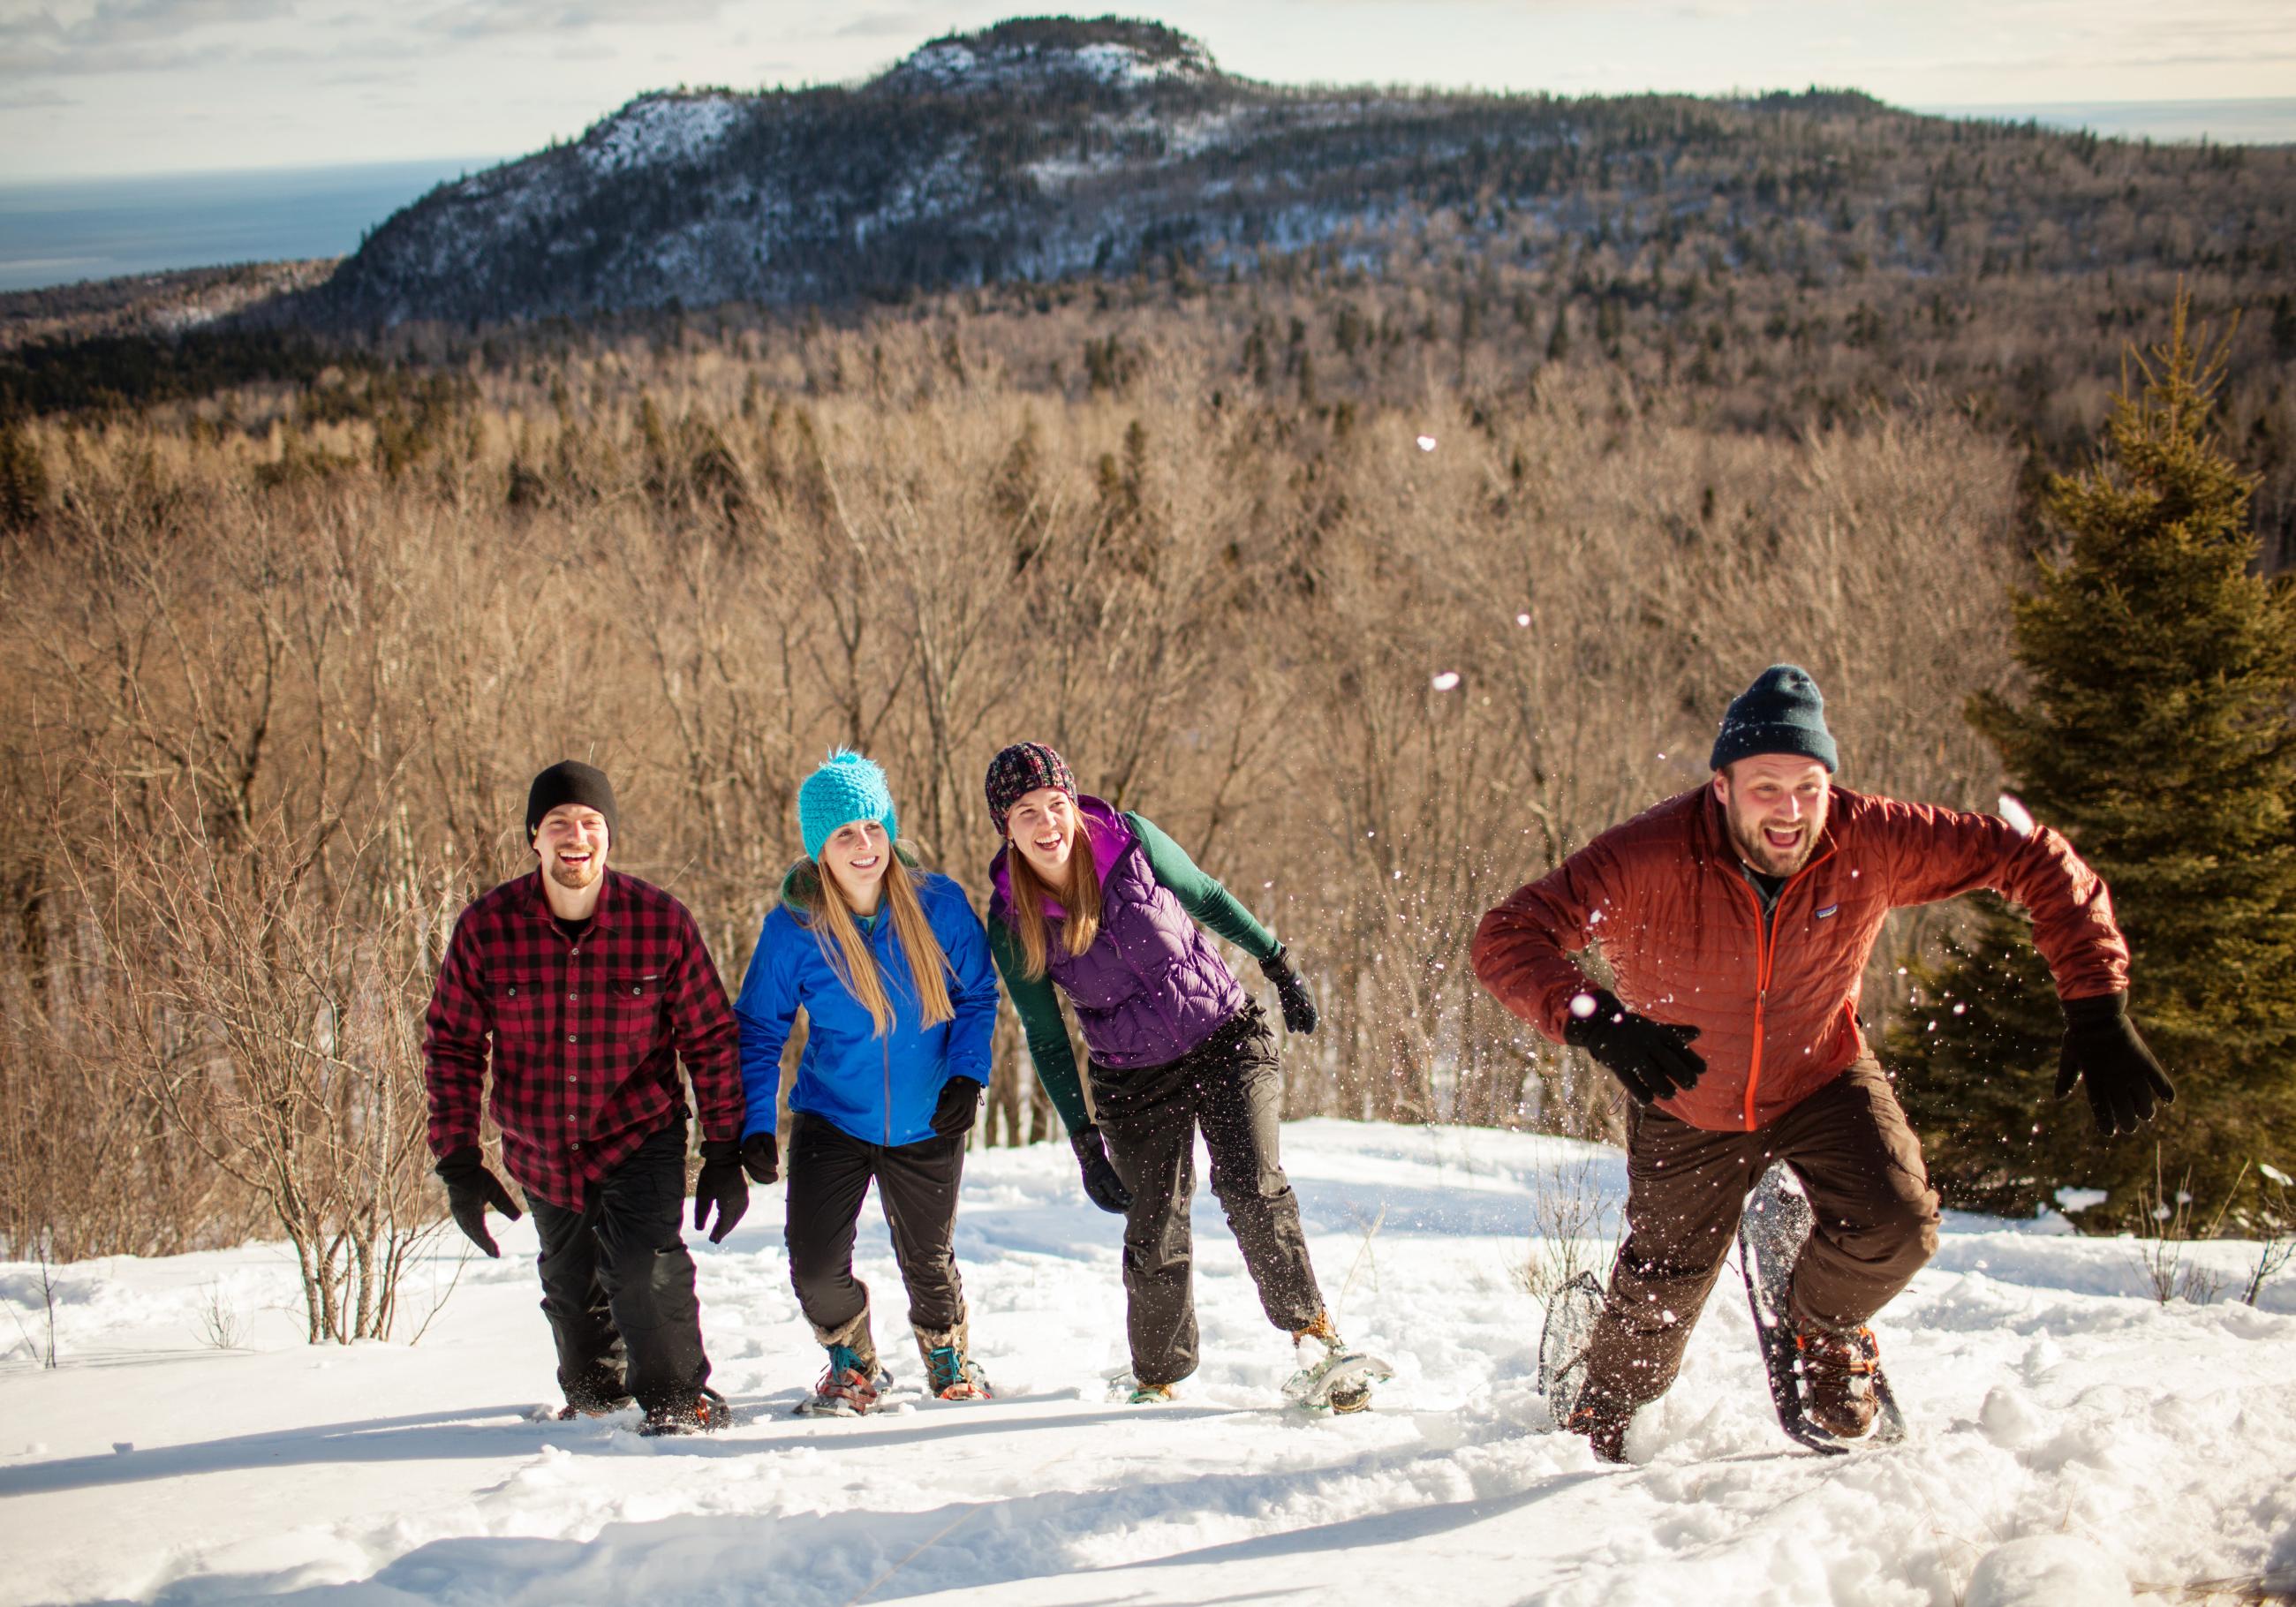 How to stay safe while snowshoeing and winter hiking